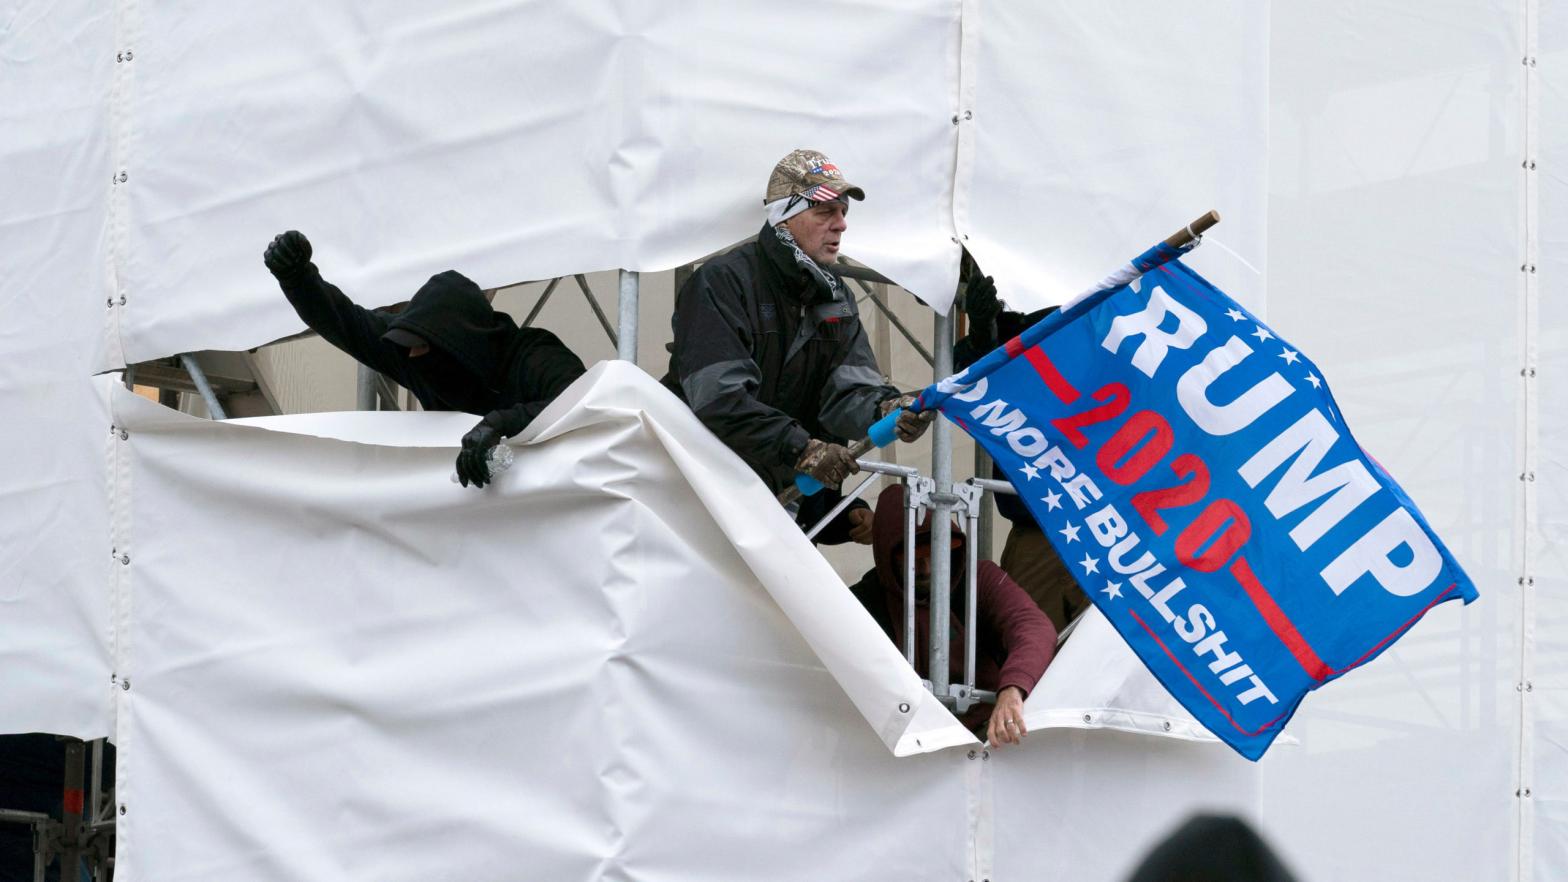 Trump supporters are seen outside the Capitol, Wednesday, Jan. 6, 2021,  in Washington. As Congress prepares to affirm President-elect Joe  Biden's victory, thousands of people have gathered to show their support  for President Donald Trump and his claims of election fraud. (Photo: Jose Luis Magana, AP)